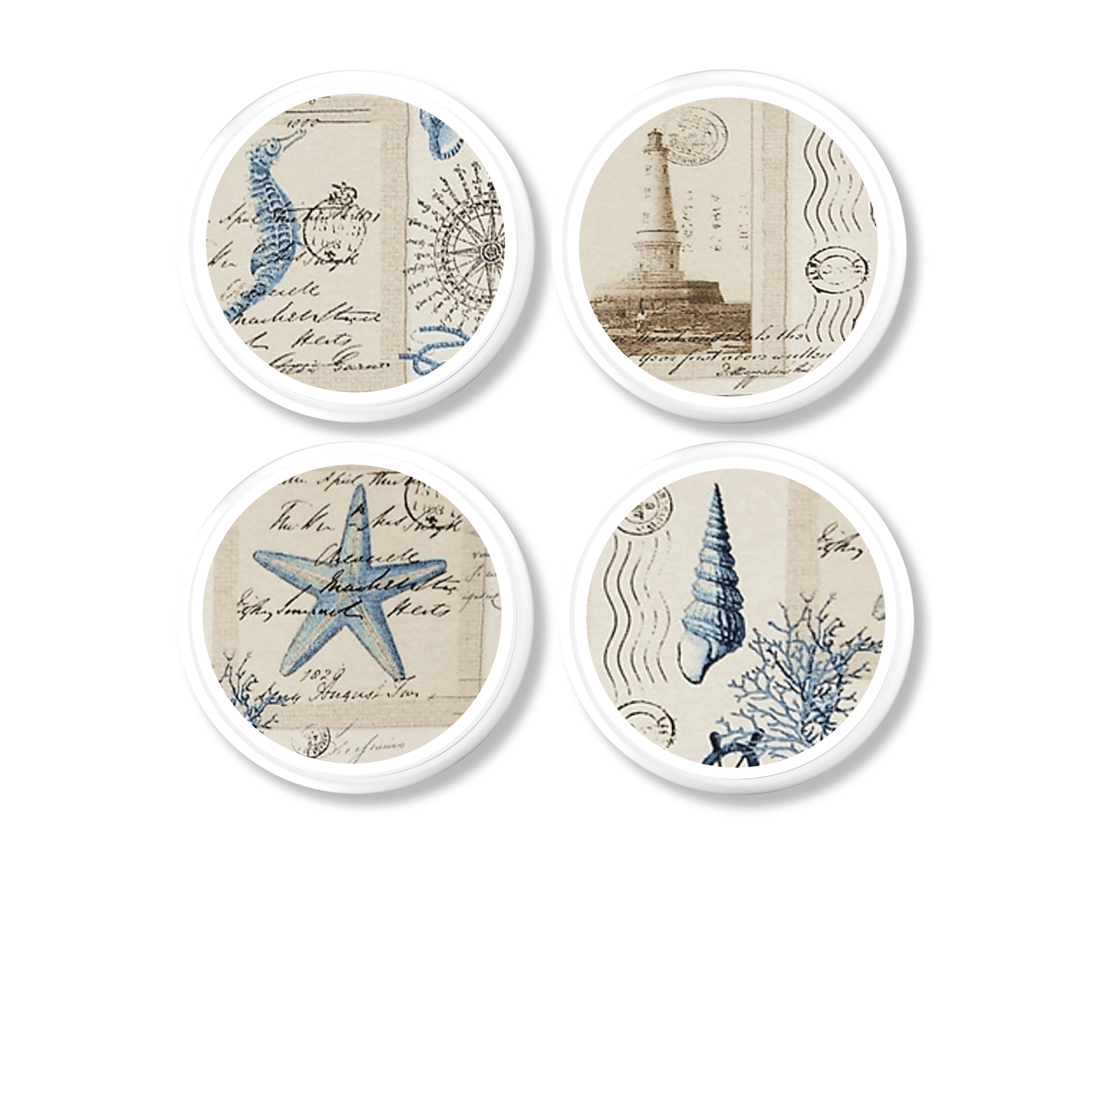 4 handmade coastal style drawer pulls. Beachy post card collage of lighthouse, starfish, seahorse, ship wheel, coral and seashell.